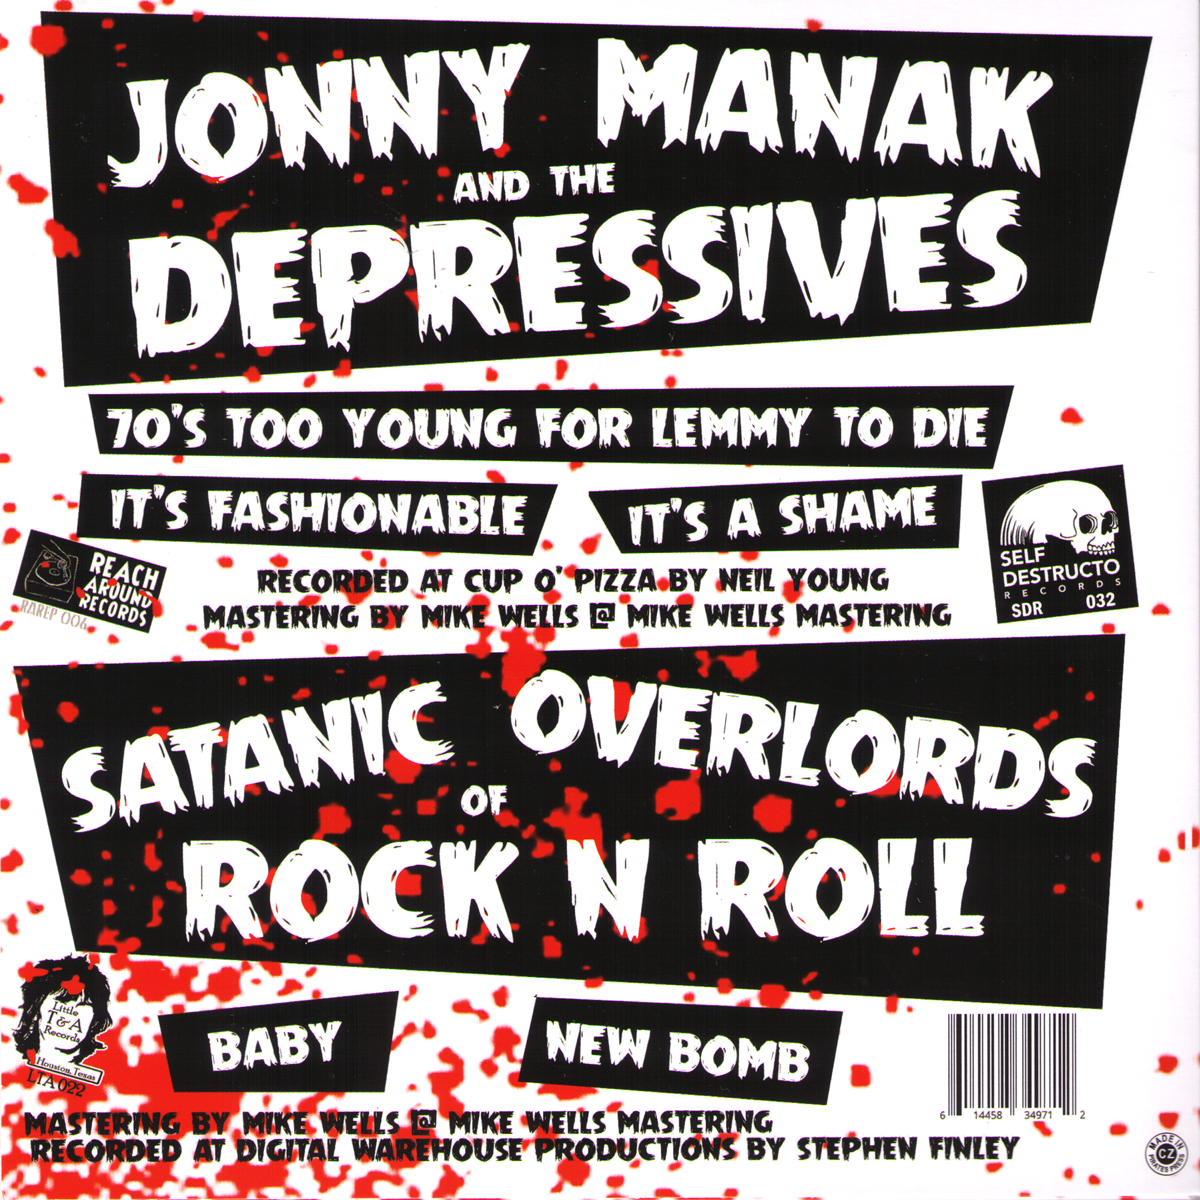 Jonny Manak And The Depressives / Satanic Overlords Of Rock 'N' Roll - Split 7” ~HELLACOPTERS!